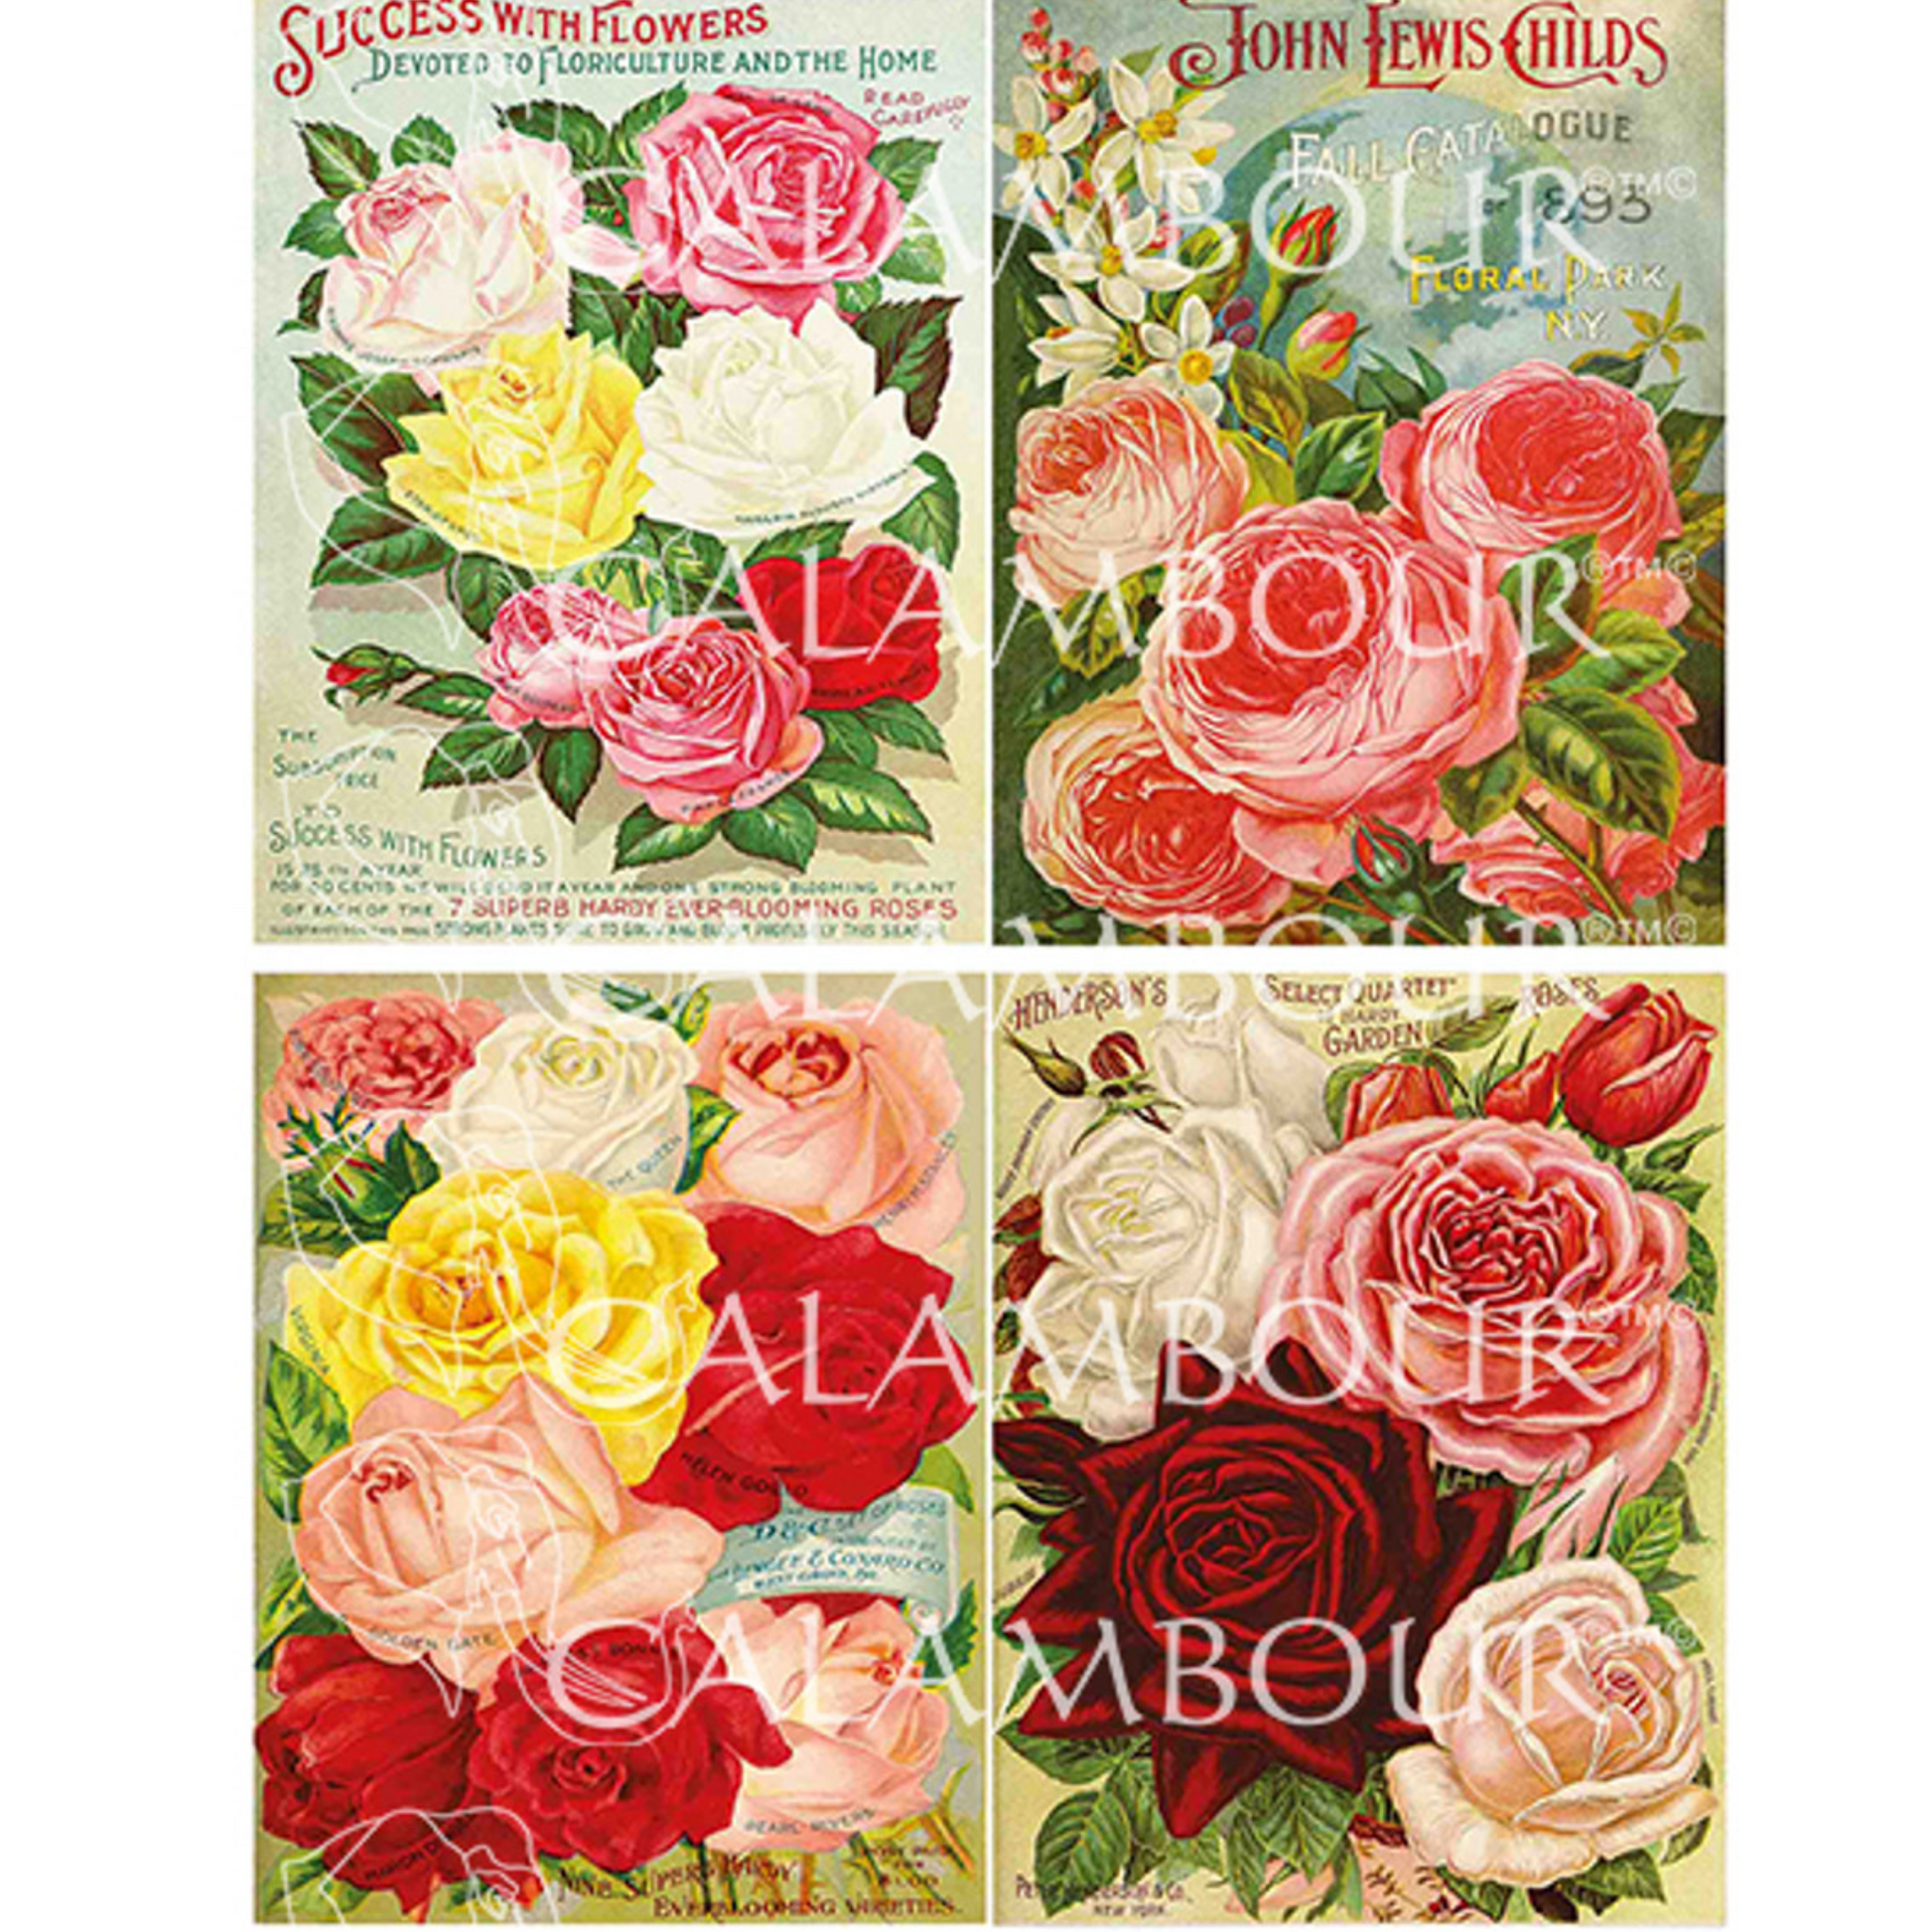 "Beautiful Open Roses 4 Pack" decoupage rice paper by Calambour. Available at Milton's Daughter.